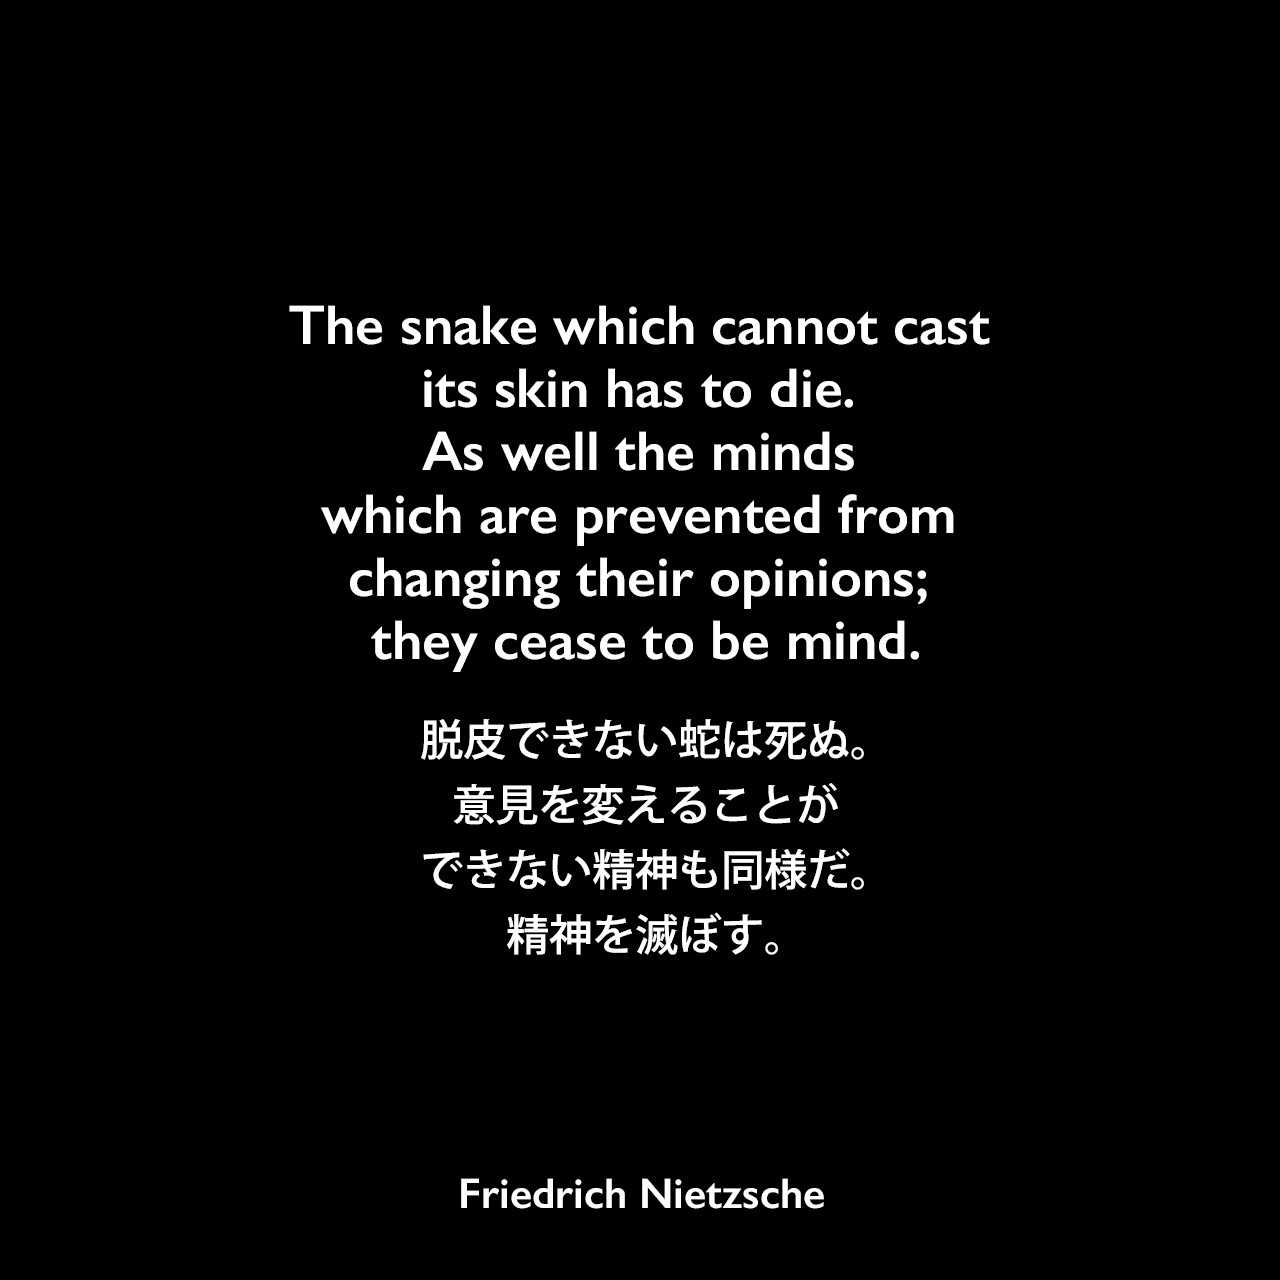 The snake which cannot cast its skin has to die. As well the minds which are prevented from changing their opinions; they cease to be mind.脱皮できない蛇は死ぬ。意見を変えることができない精神も同様だ。精神を滅ぼす。